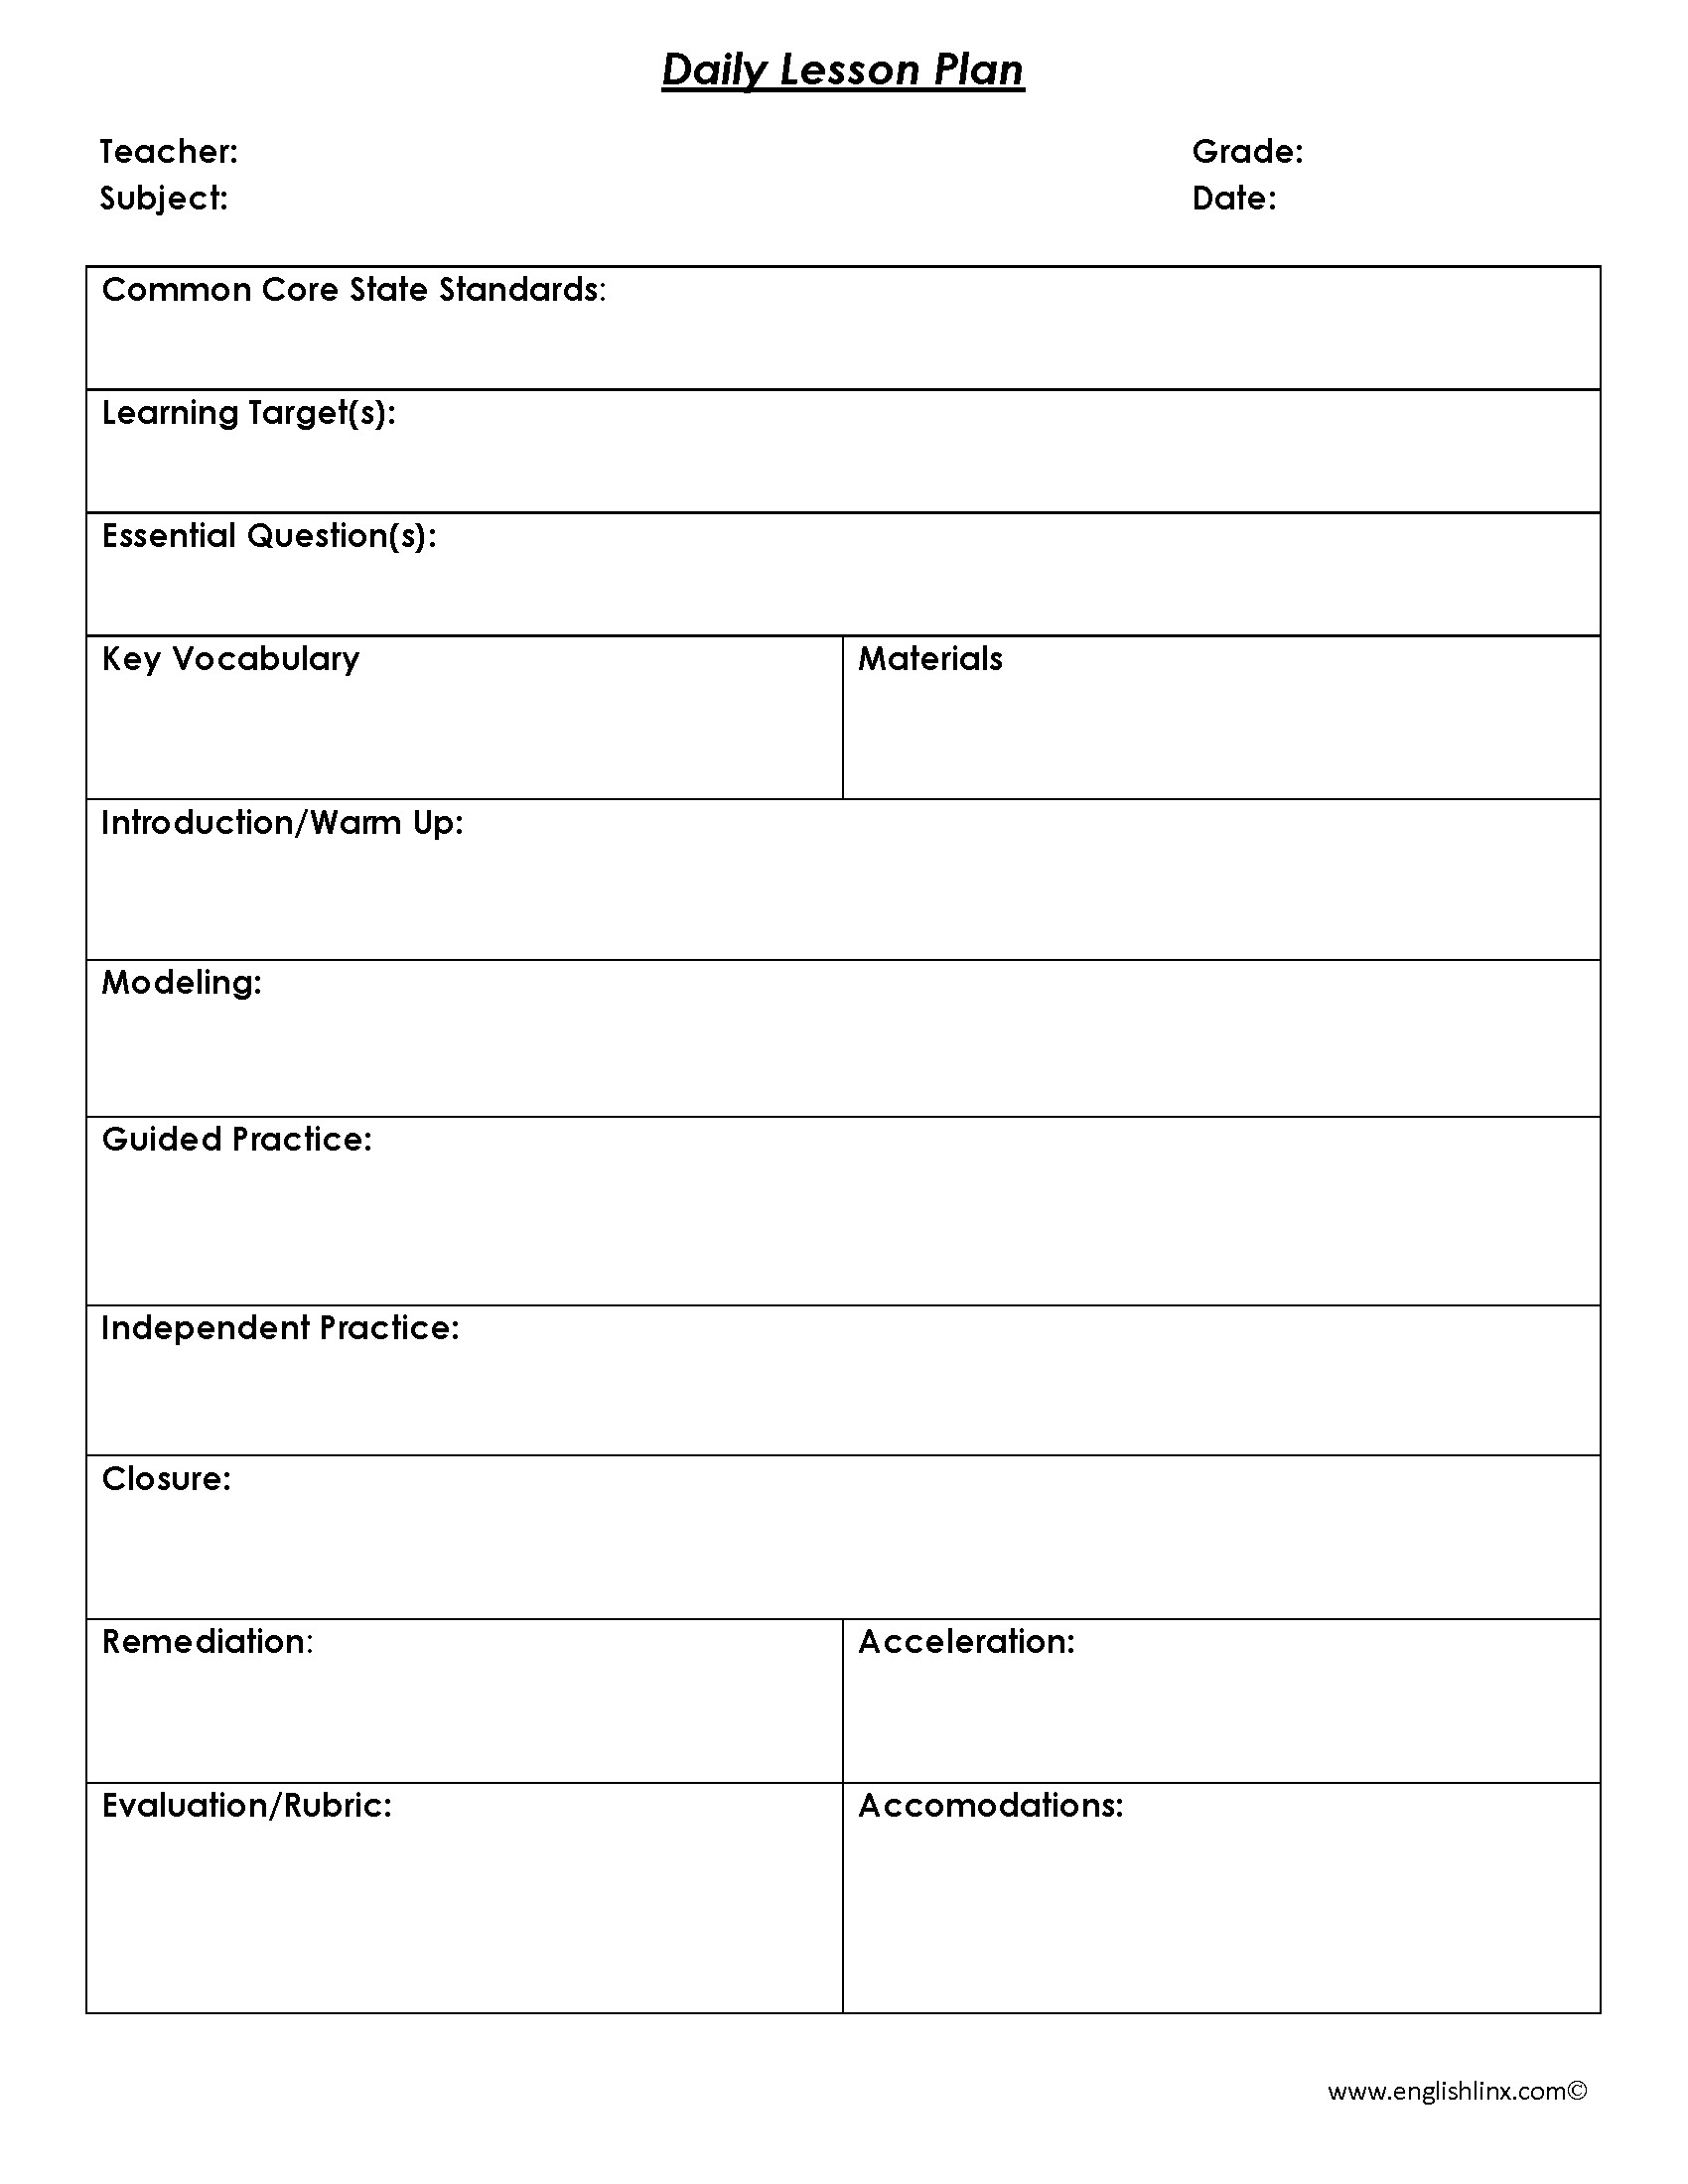 Daily Lesson Plan Template English